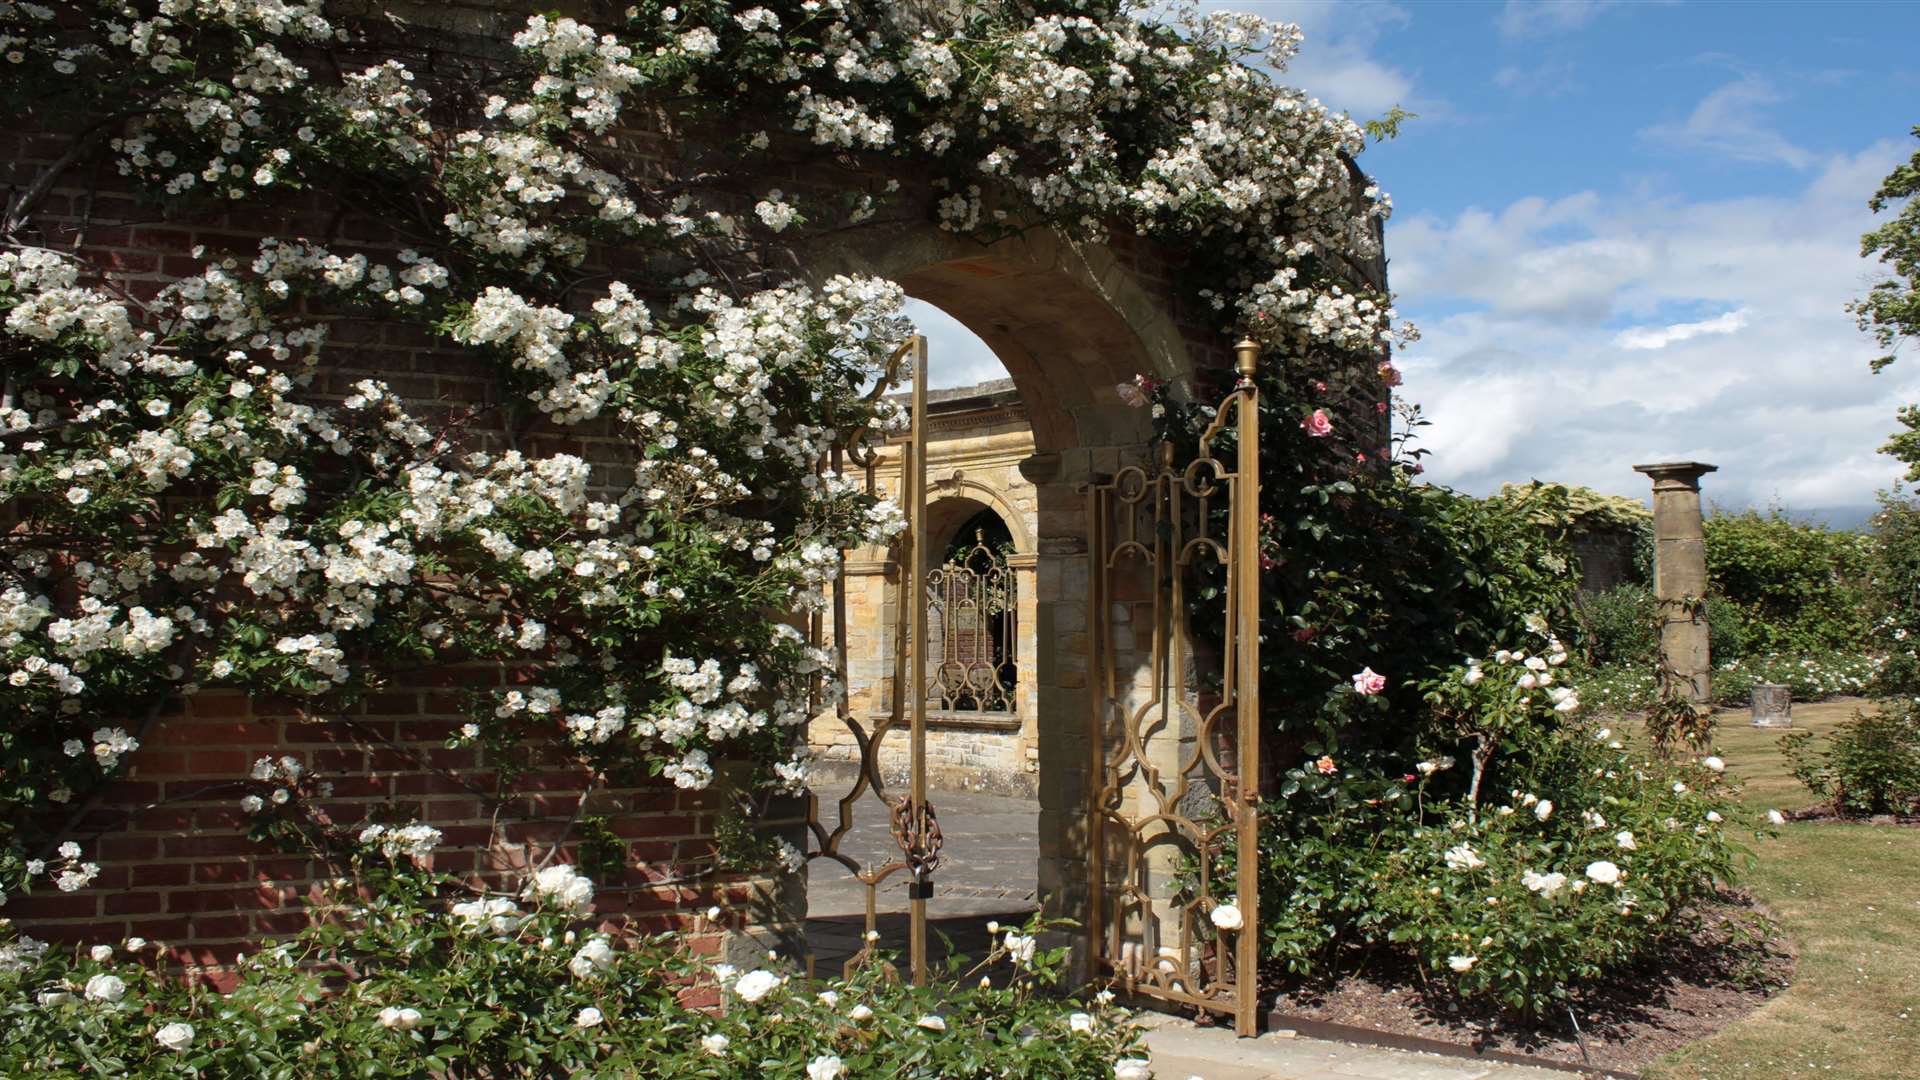 Hever in Bloom features quotes from literary greats and Harry Potter's glasses in flowers